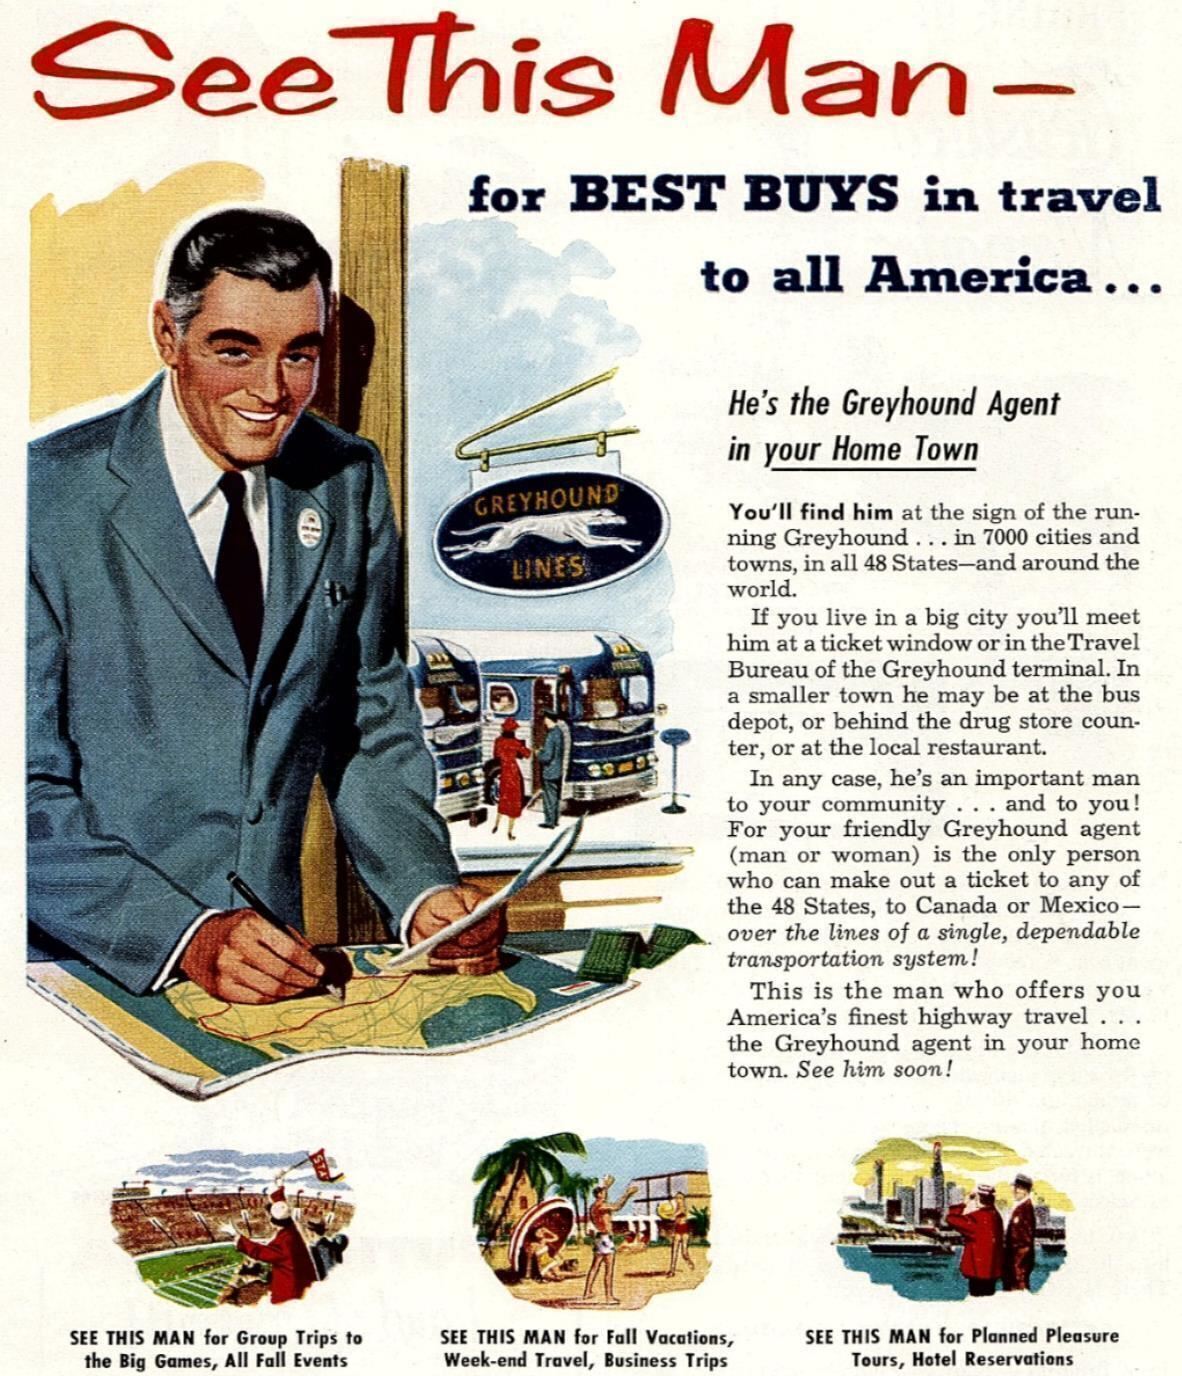 1940s GREYHOUND BUS LINES BEST BUYS IN TRAVEL TO ALL AMERICA MAGAZINE AD 27-28